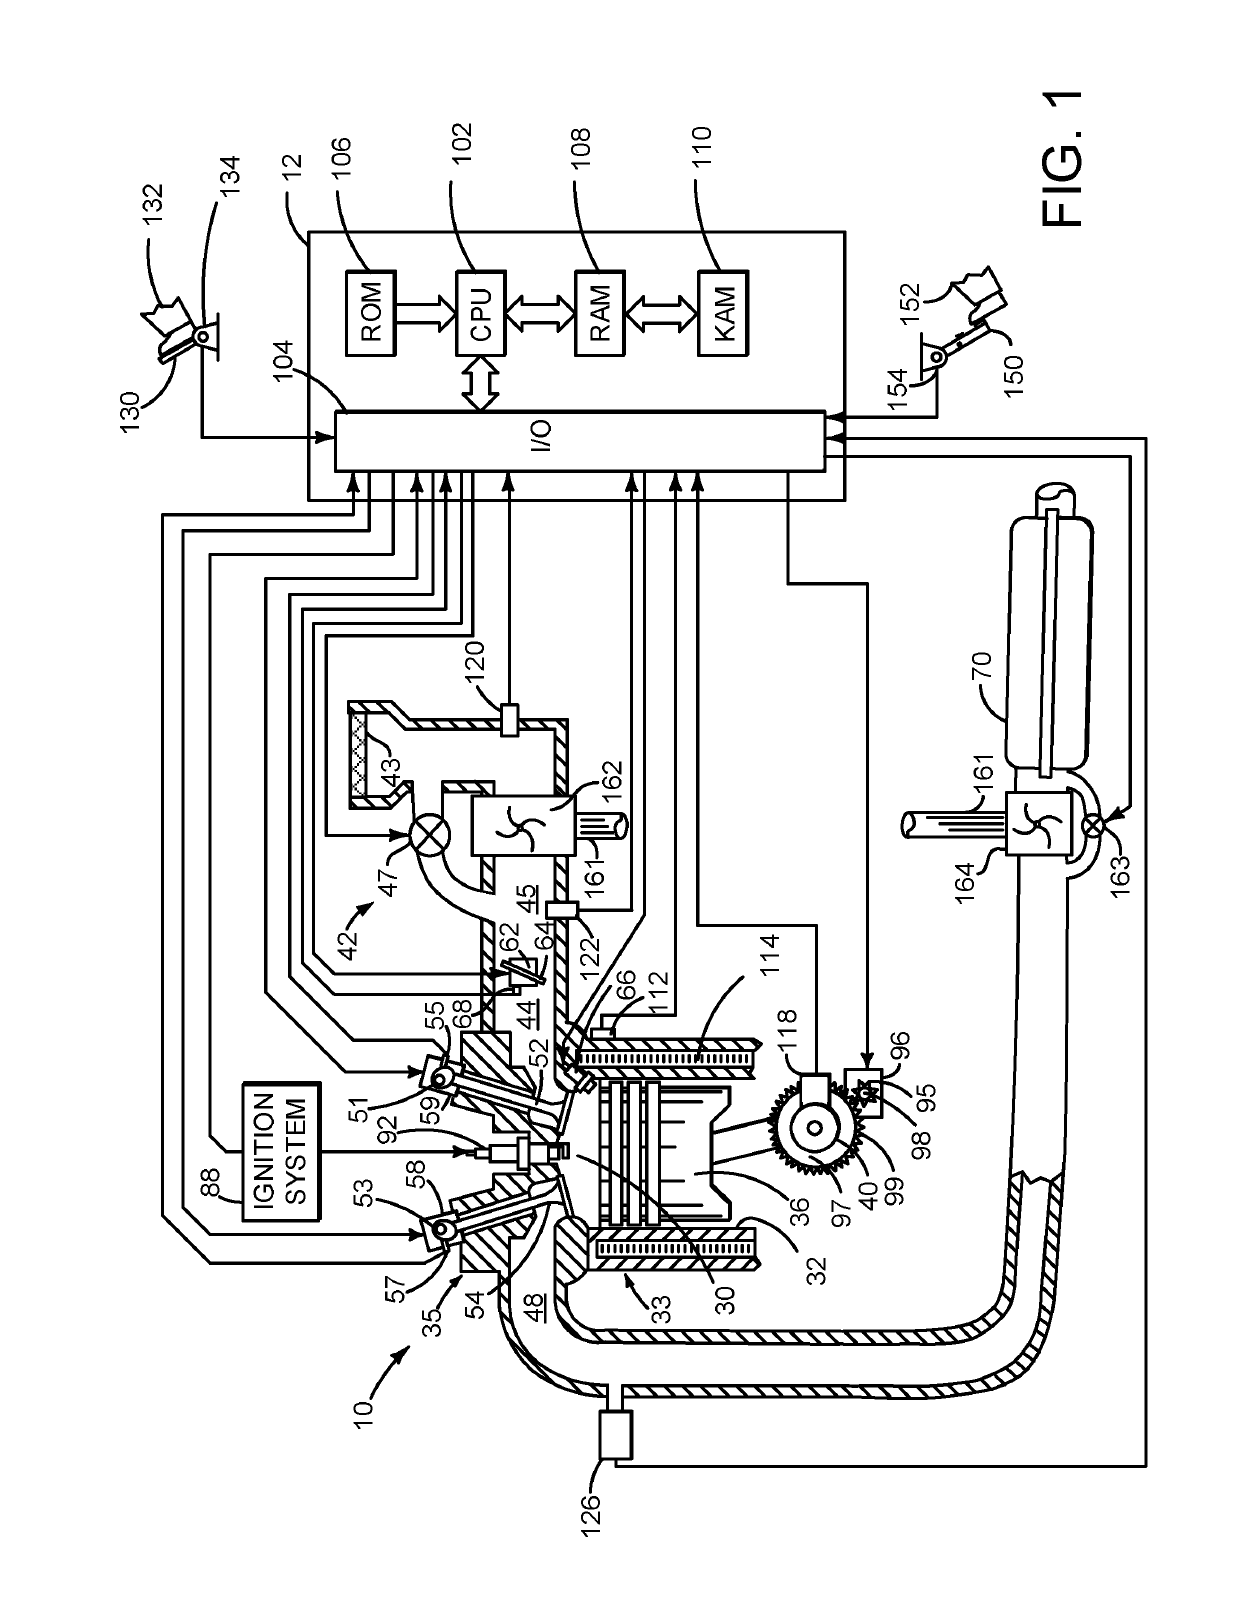 Method and system for providing boost to an internal combustion engine